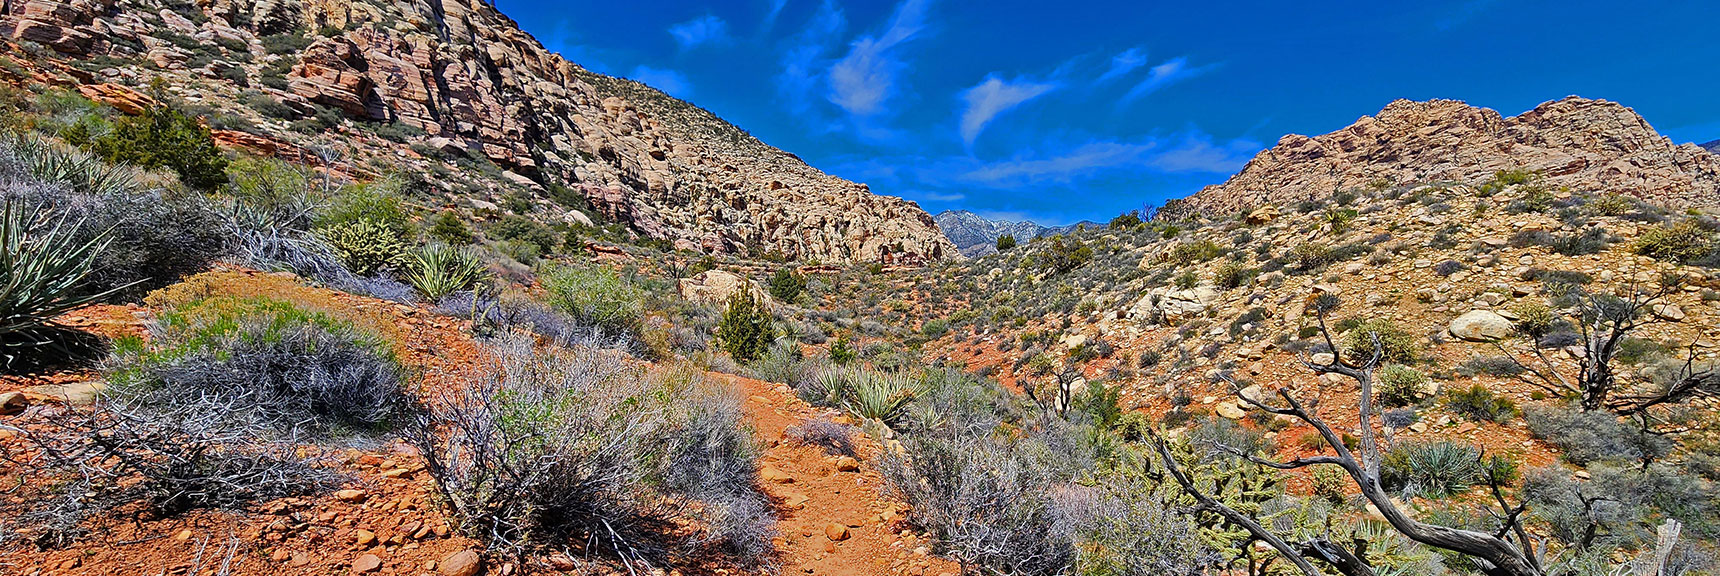 Trail Color Changes with the Prevailing Rock Type. Aztec Red Here | SMYC Trail | Red Rock Canyon National Conservation Area, Nevada | David Smith | LasVegasAreaTrails.com